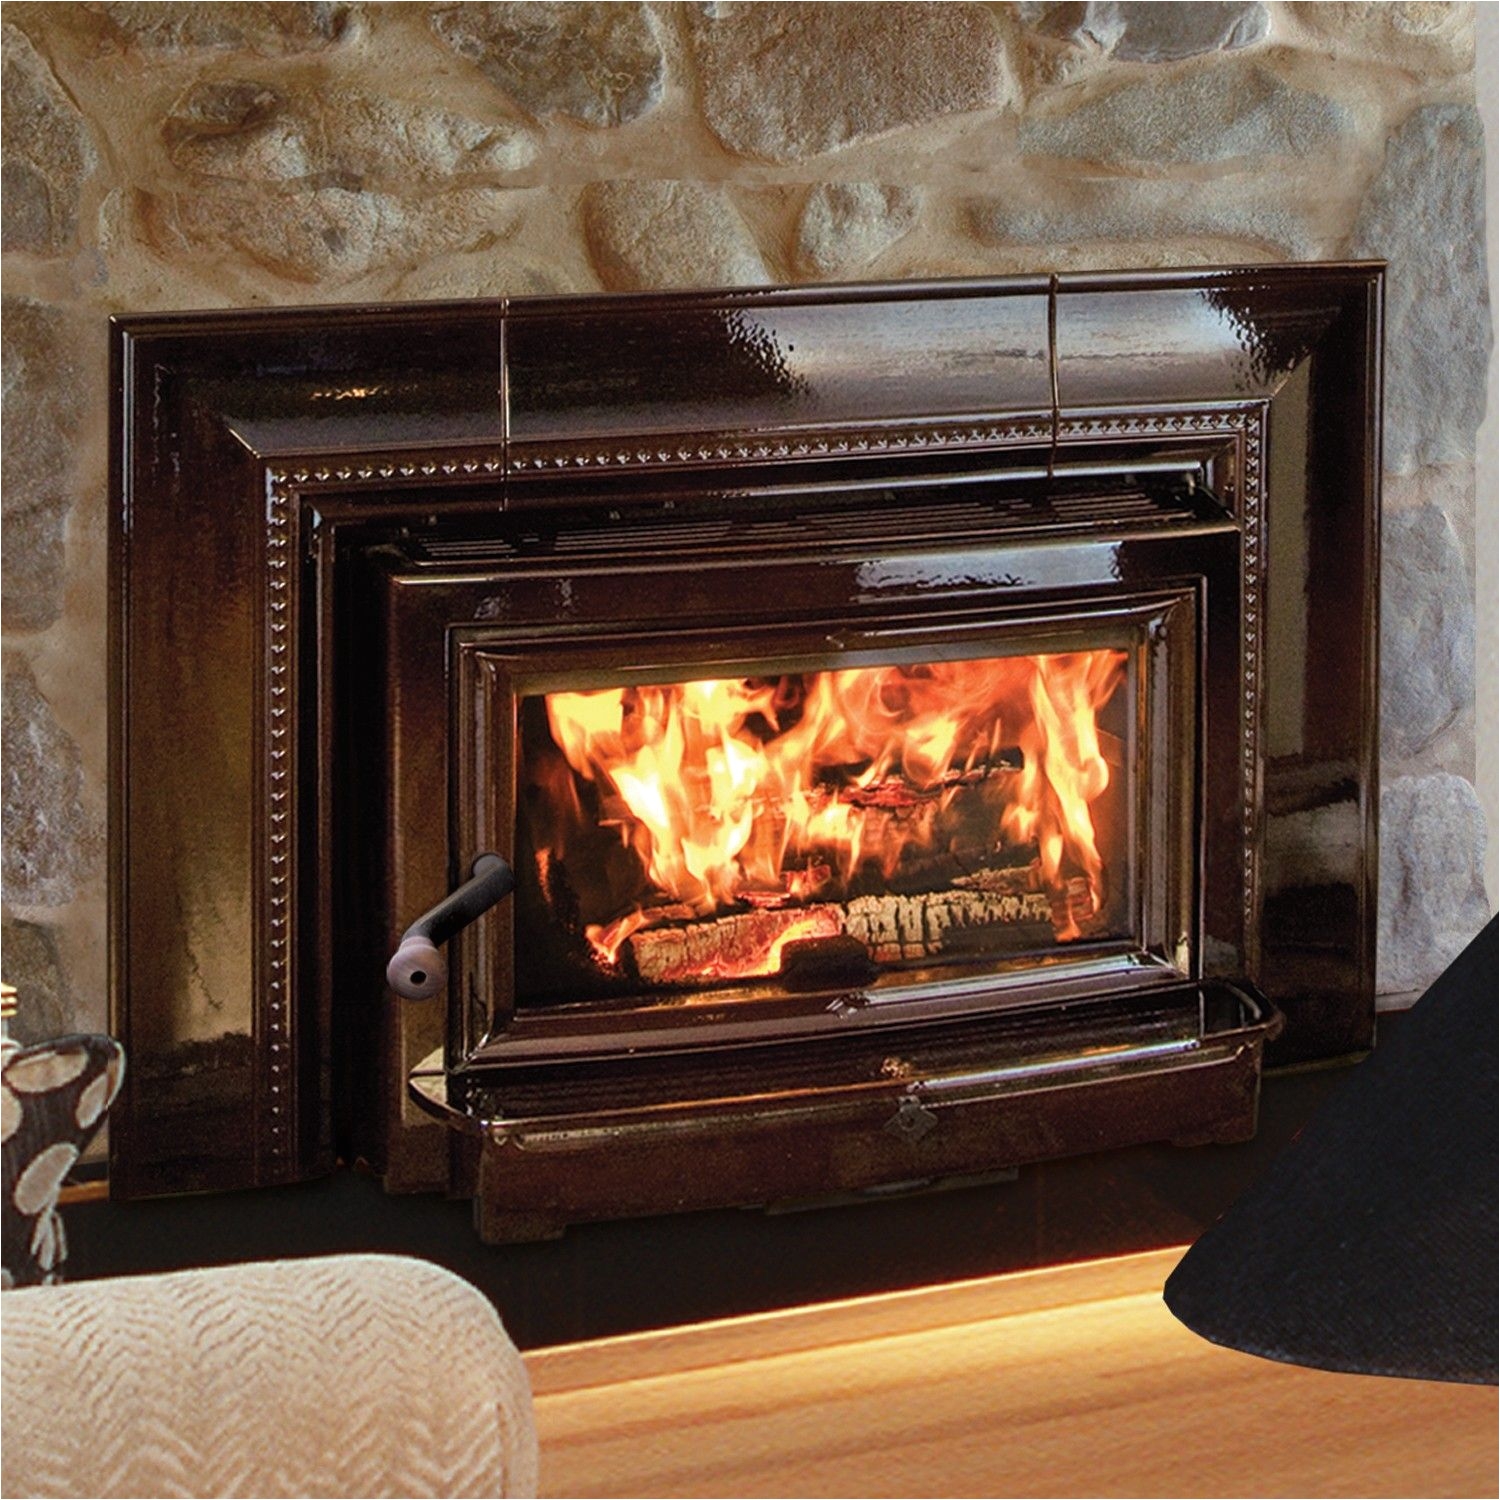 Wood Burning Fireplace Inserts for Sale Hearthstone Insert Clydesdale 8491 Wood Inserts Heats Up to 2 000